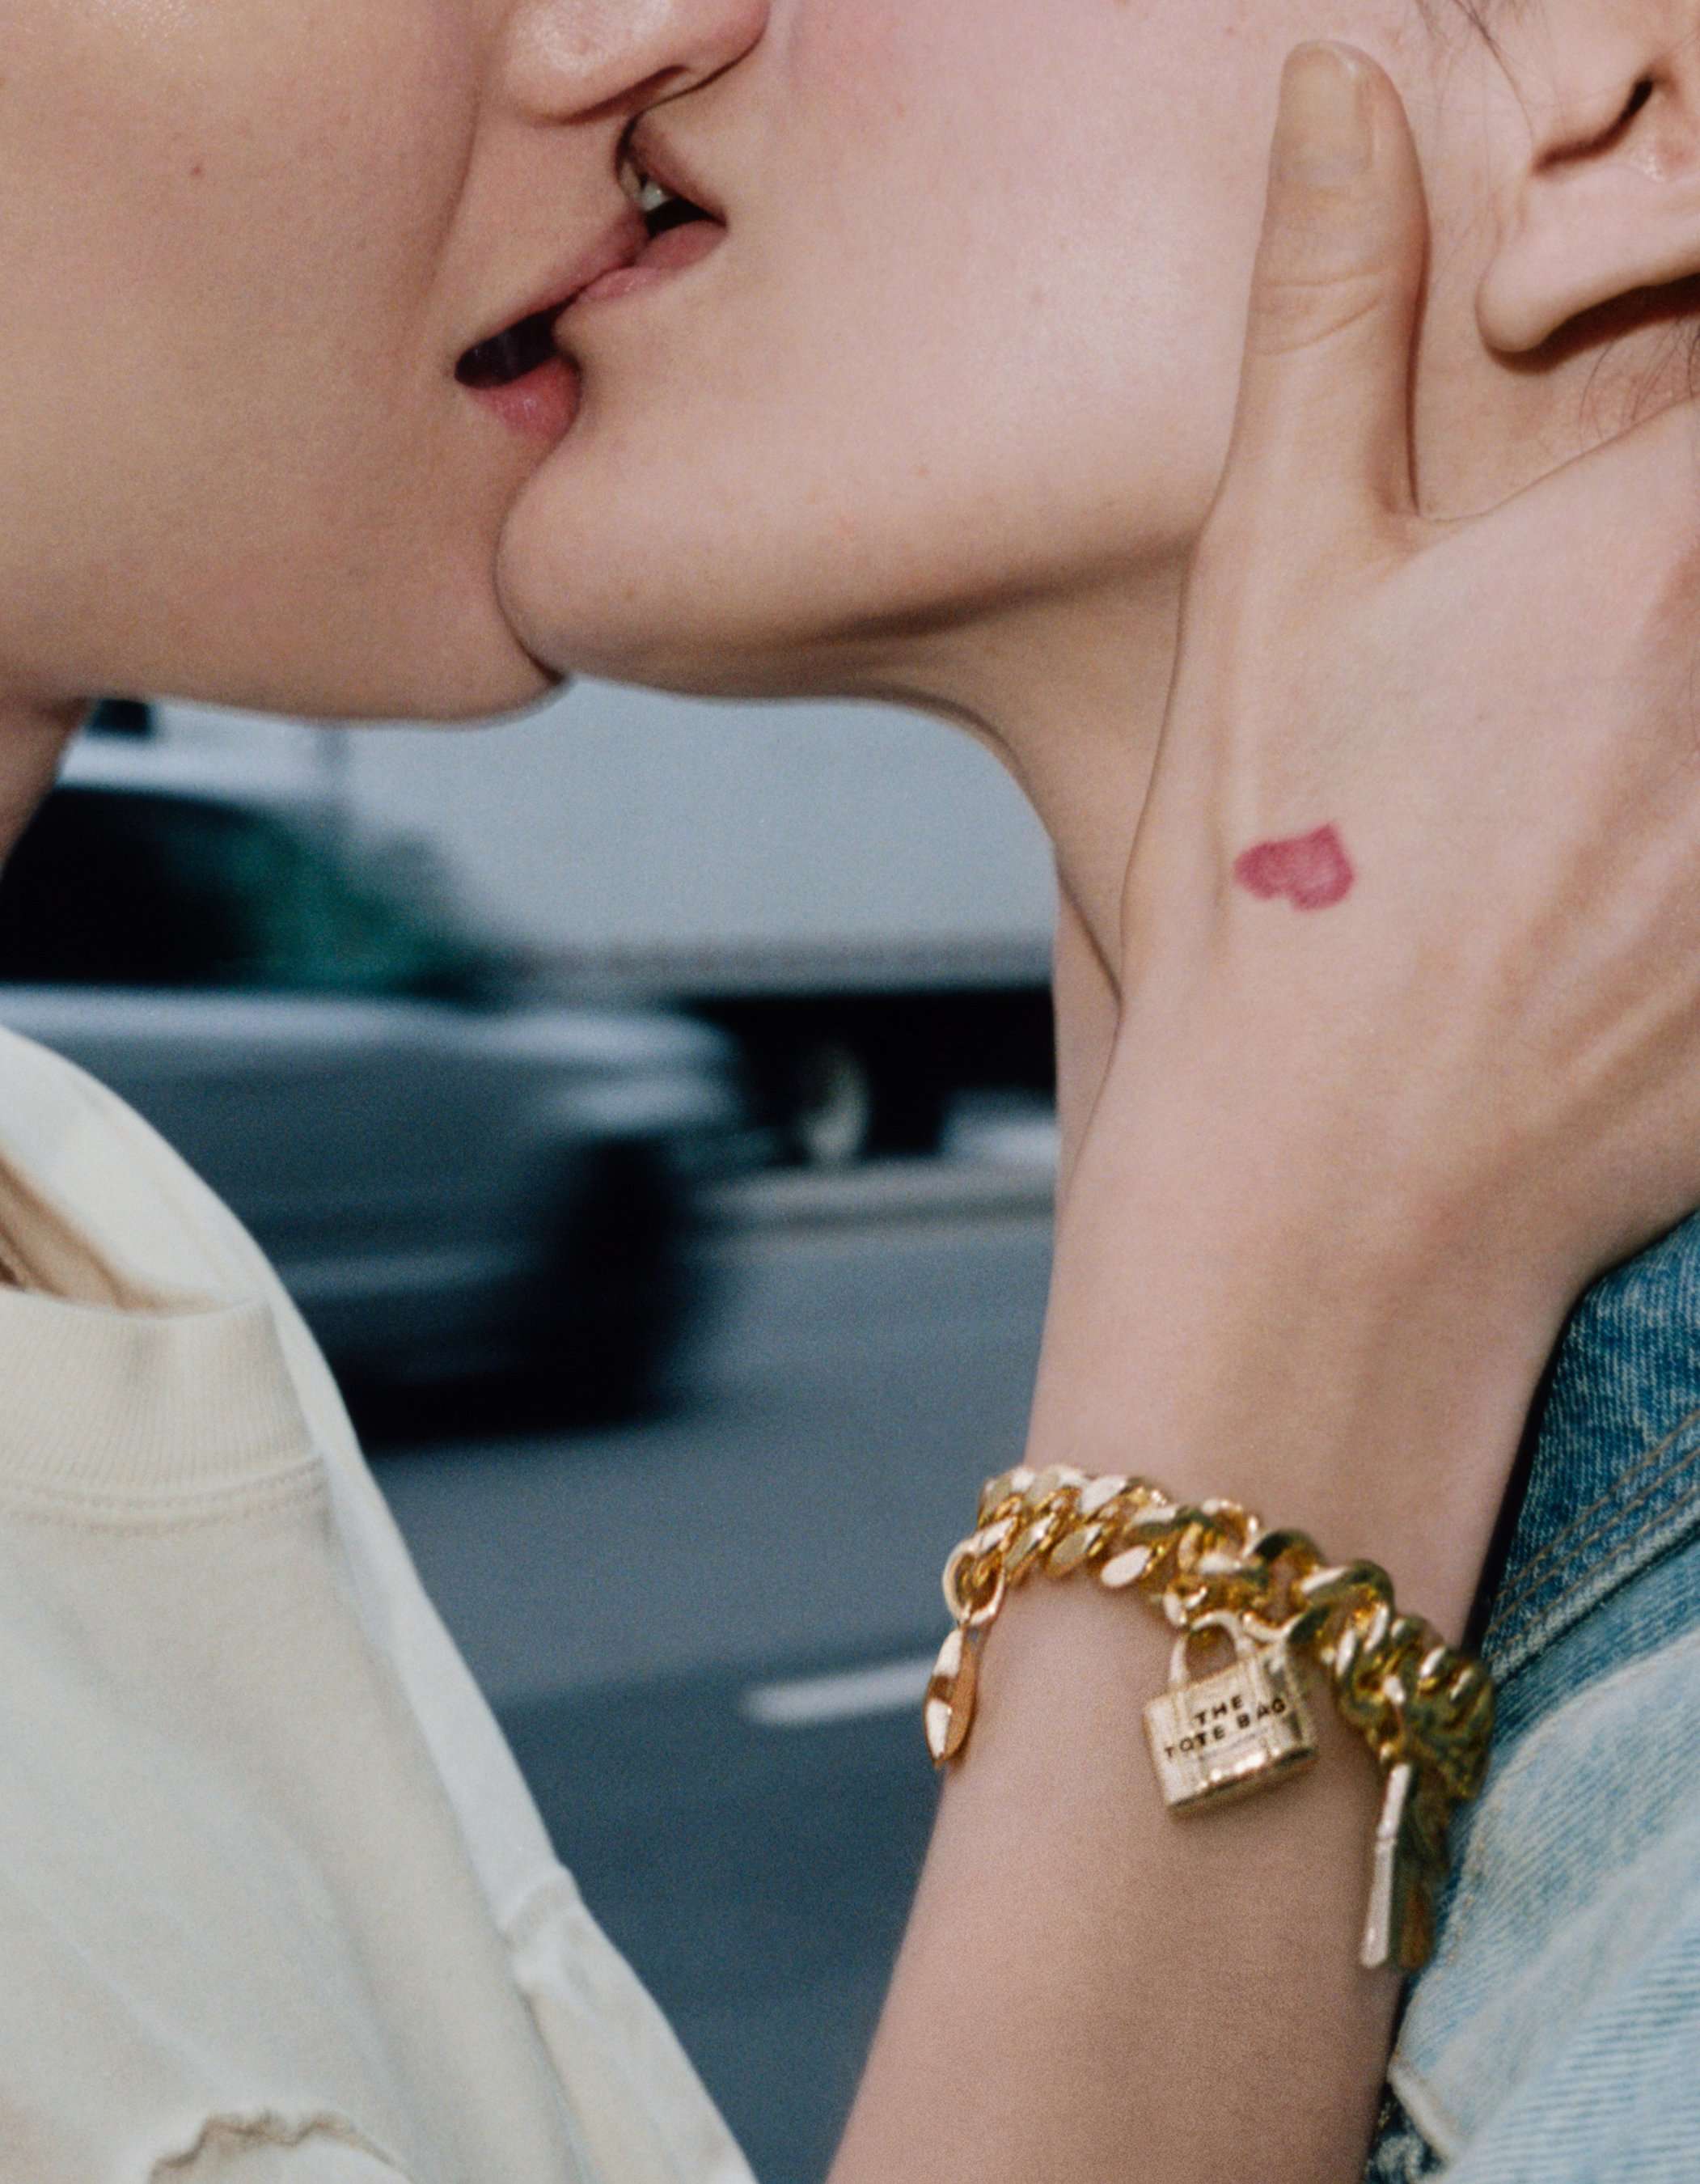 Two women kissing, with one of them wearing The Mini Icon Charm Bracelet in Light Antique Gold on her wrist.